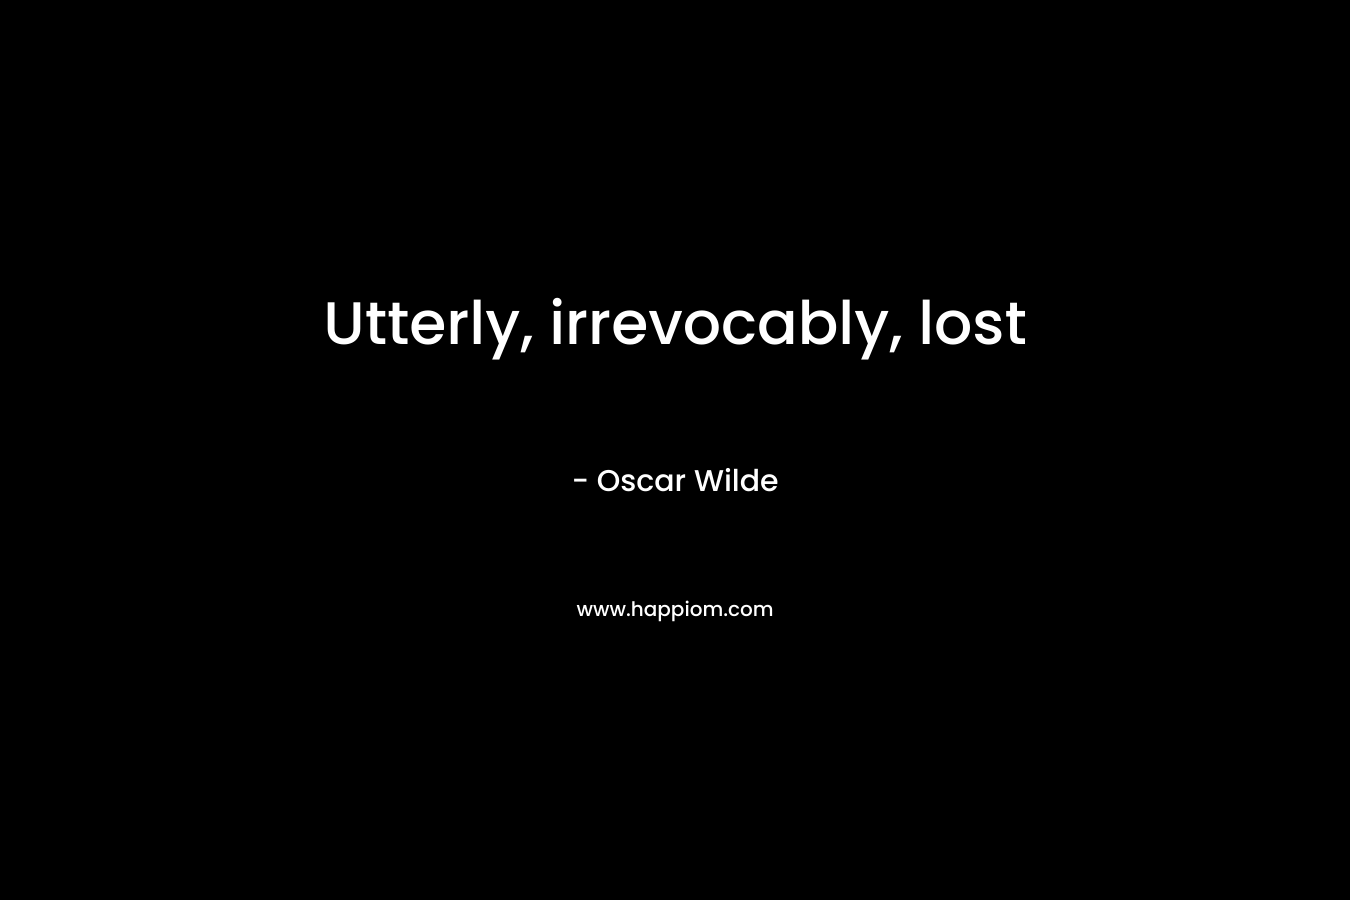 Utterly, irrevocably, lost